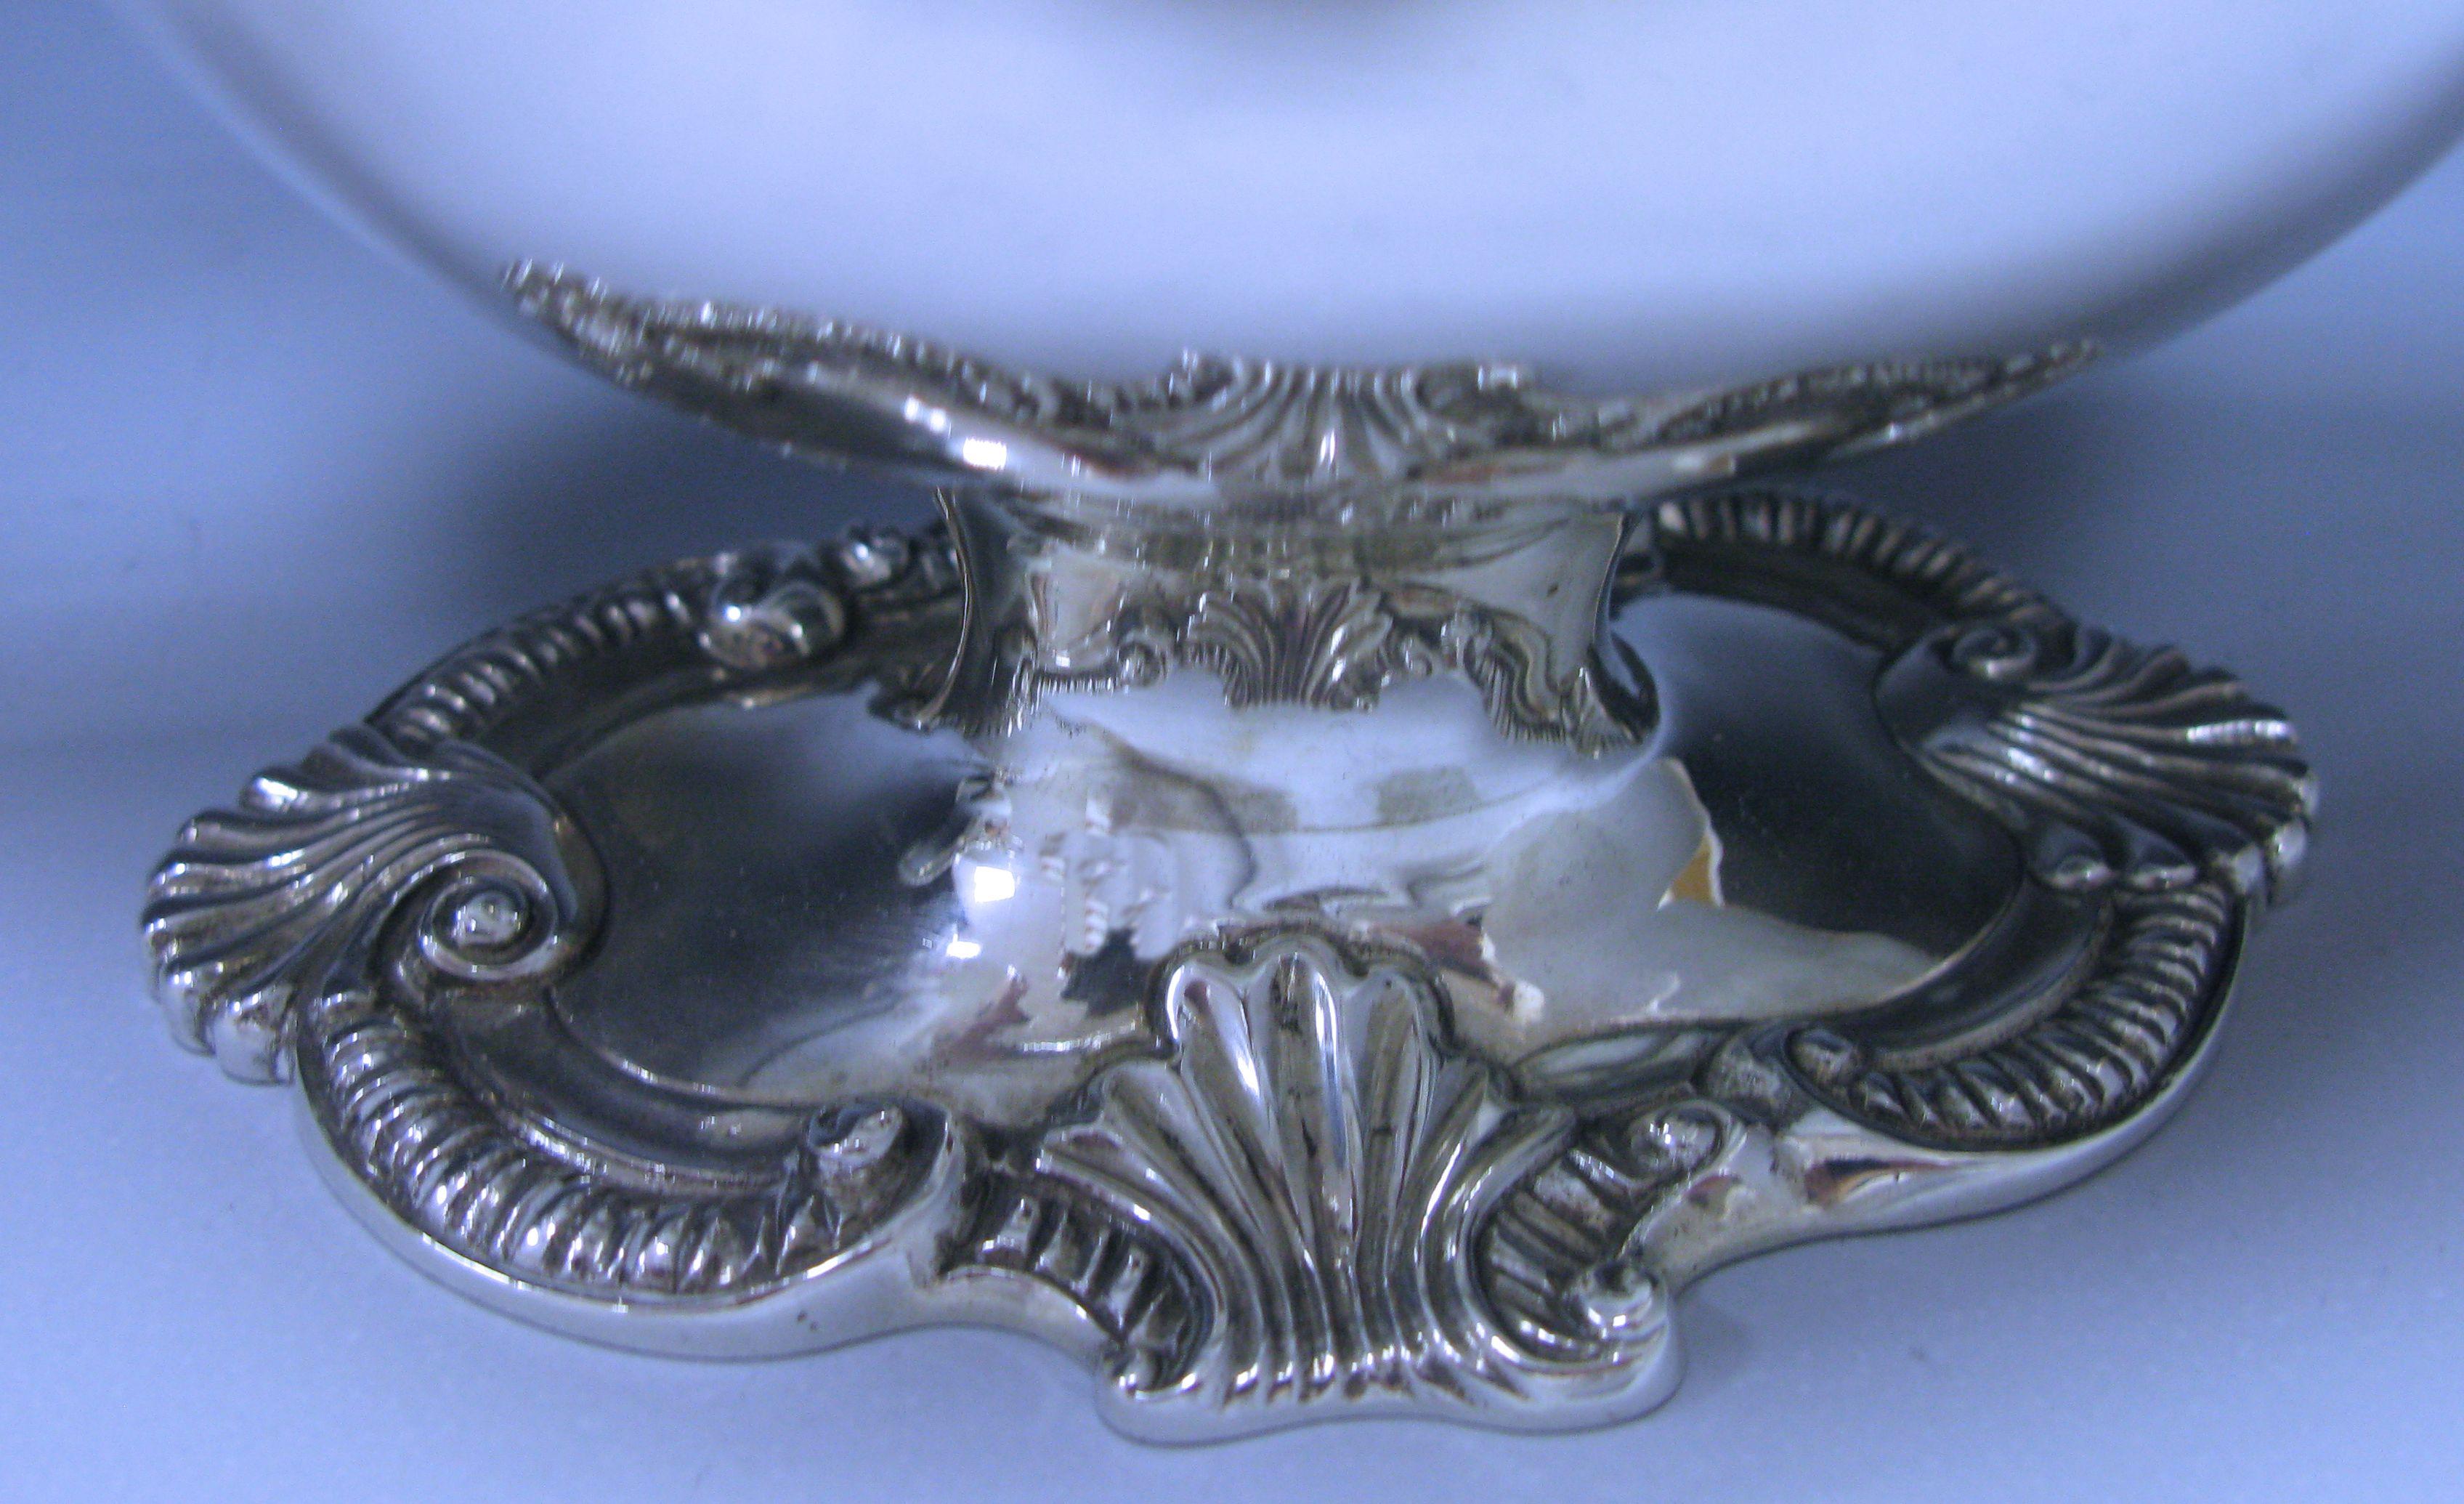 These exceptional antique sterling silver sauce boats are of oval form in a classic style.
The shaped body of each piece is plain and unembellished with an applied gadroon and shell decorated border to the shaped rim. The sauceboats are fitted with